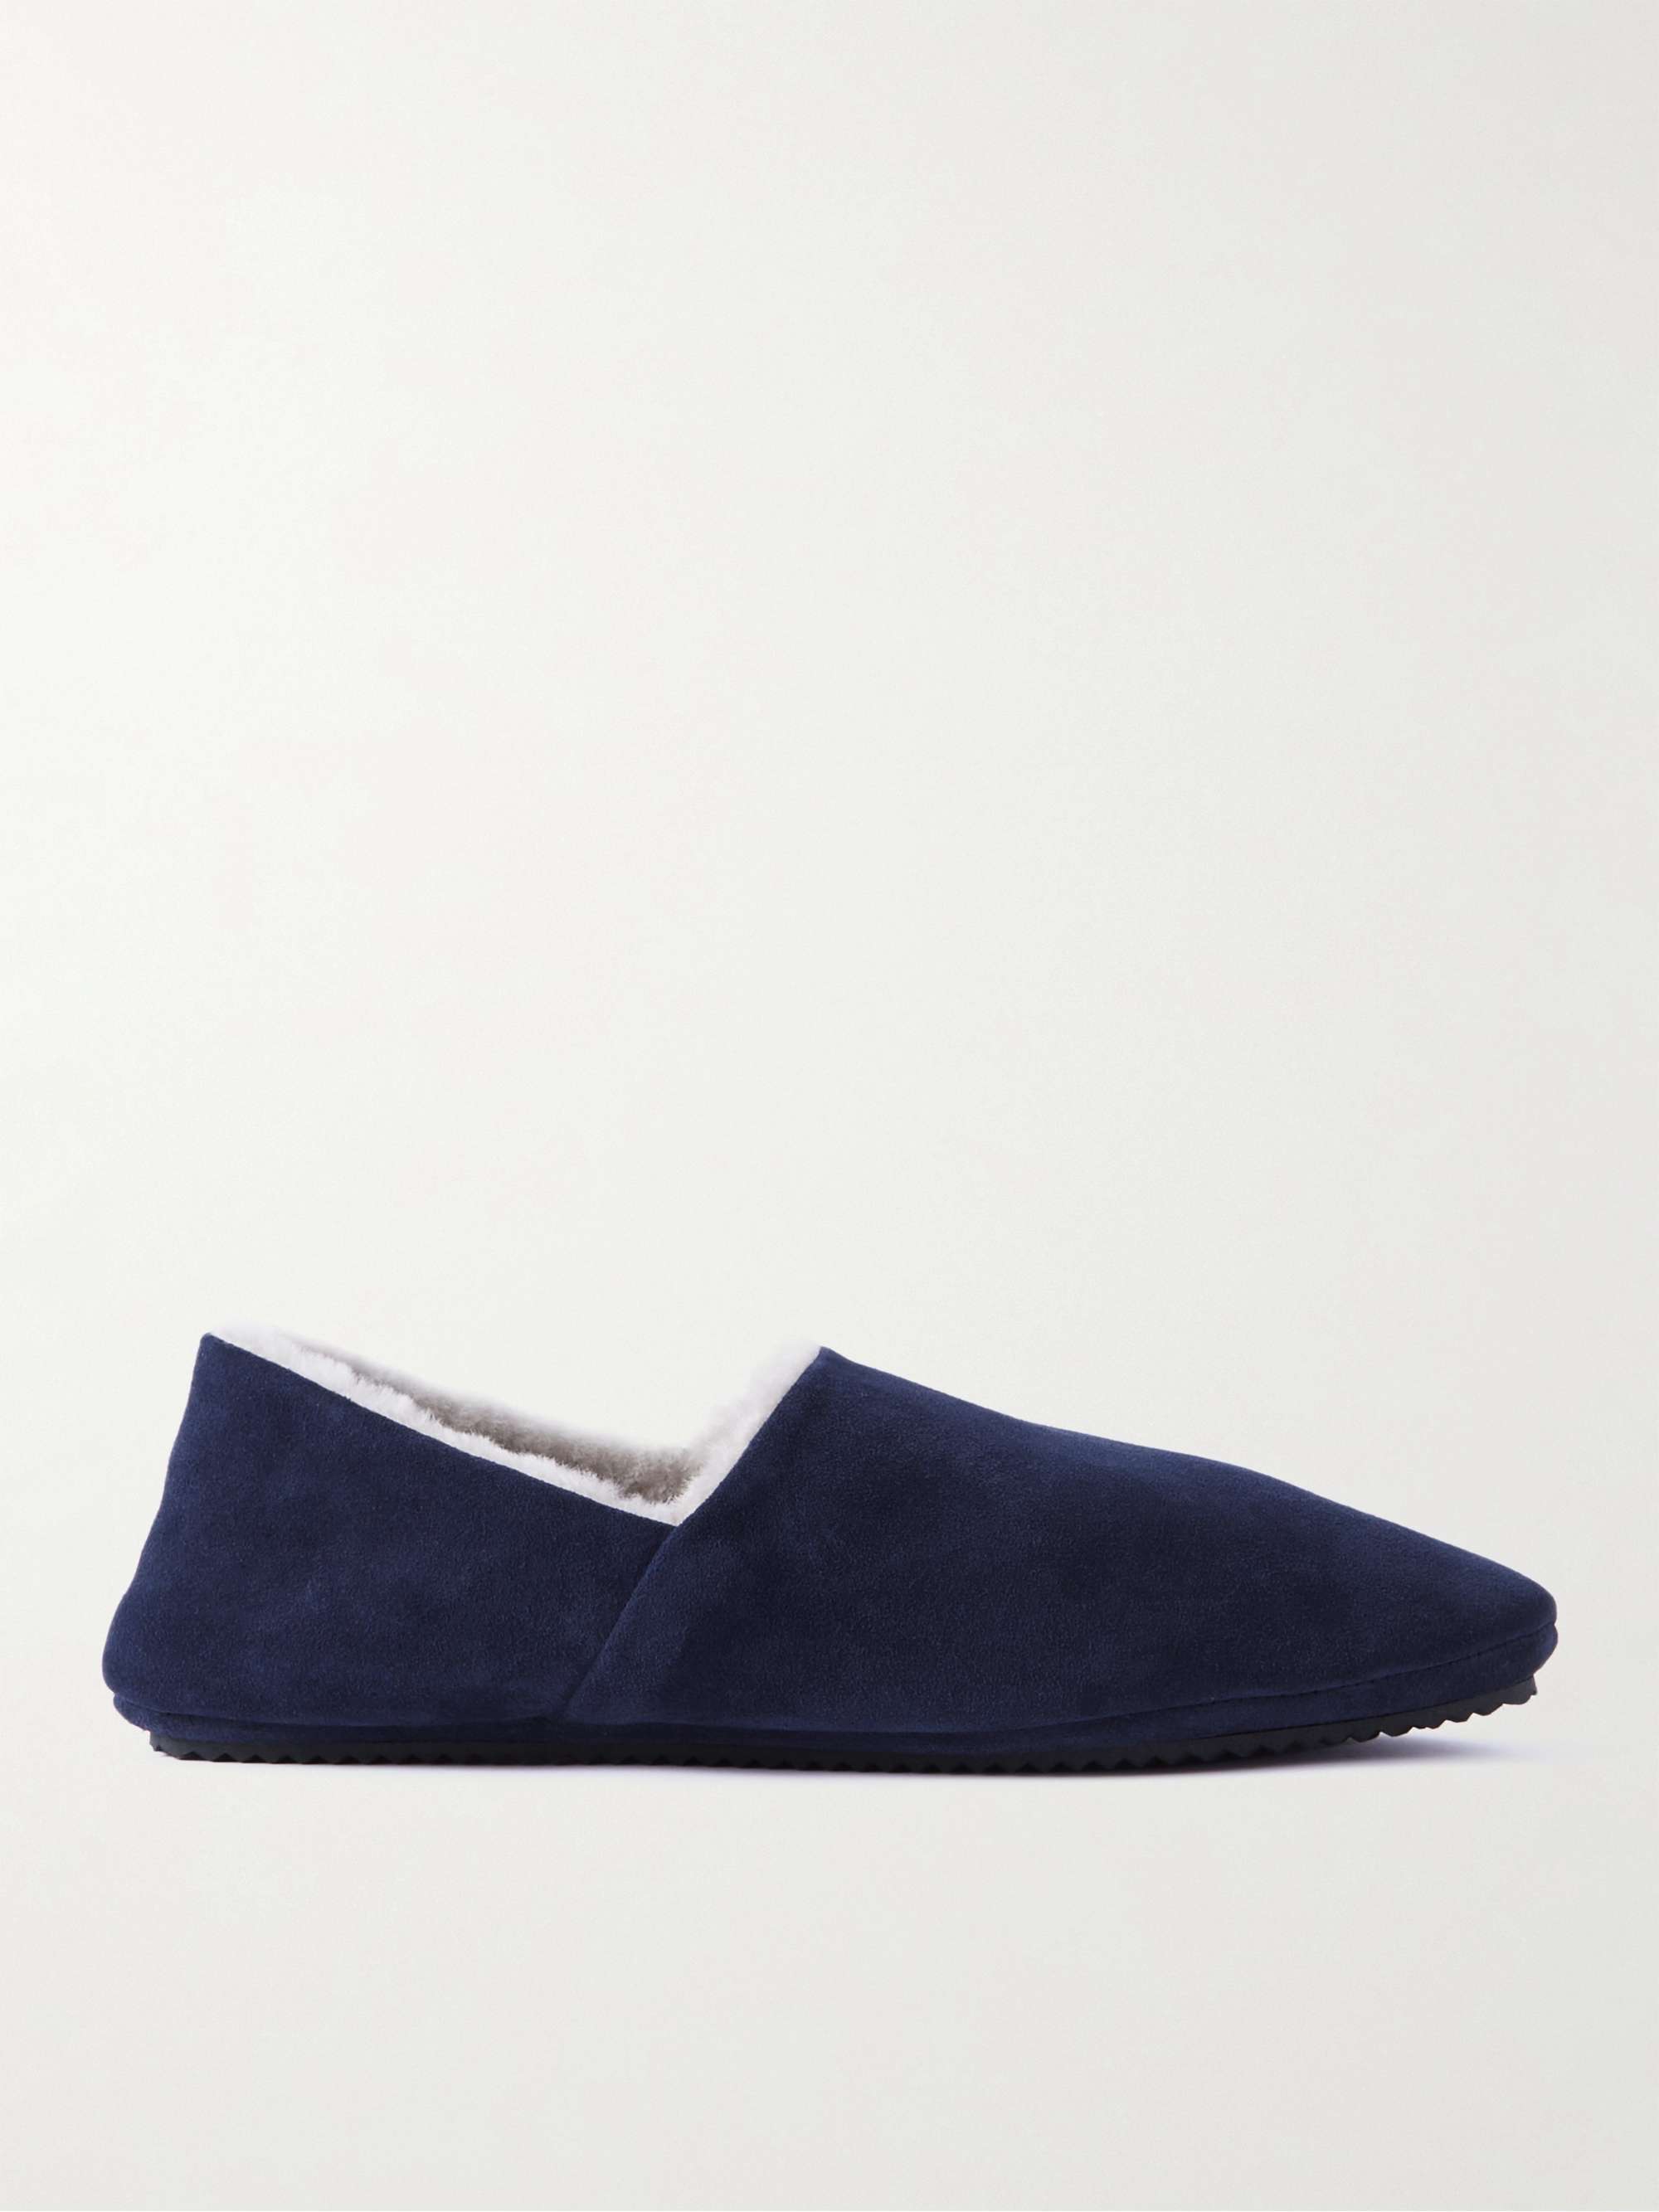 Navy Shearling-Lined Suede Slippers | MR P. | MR PORTER